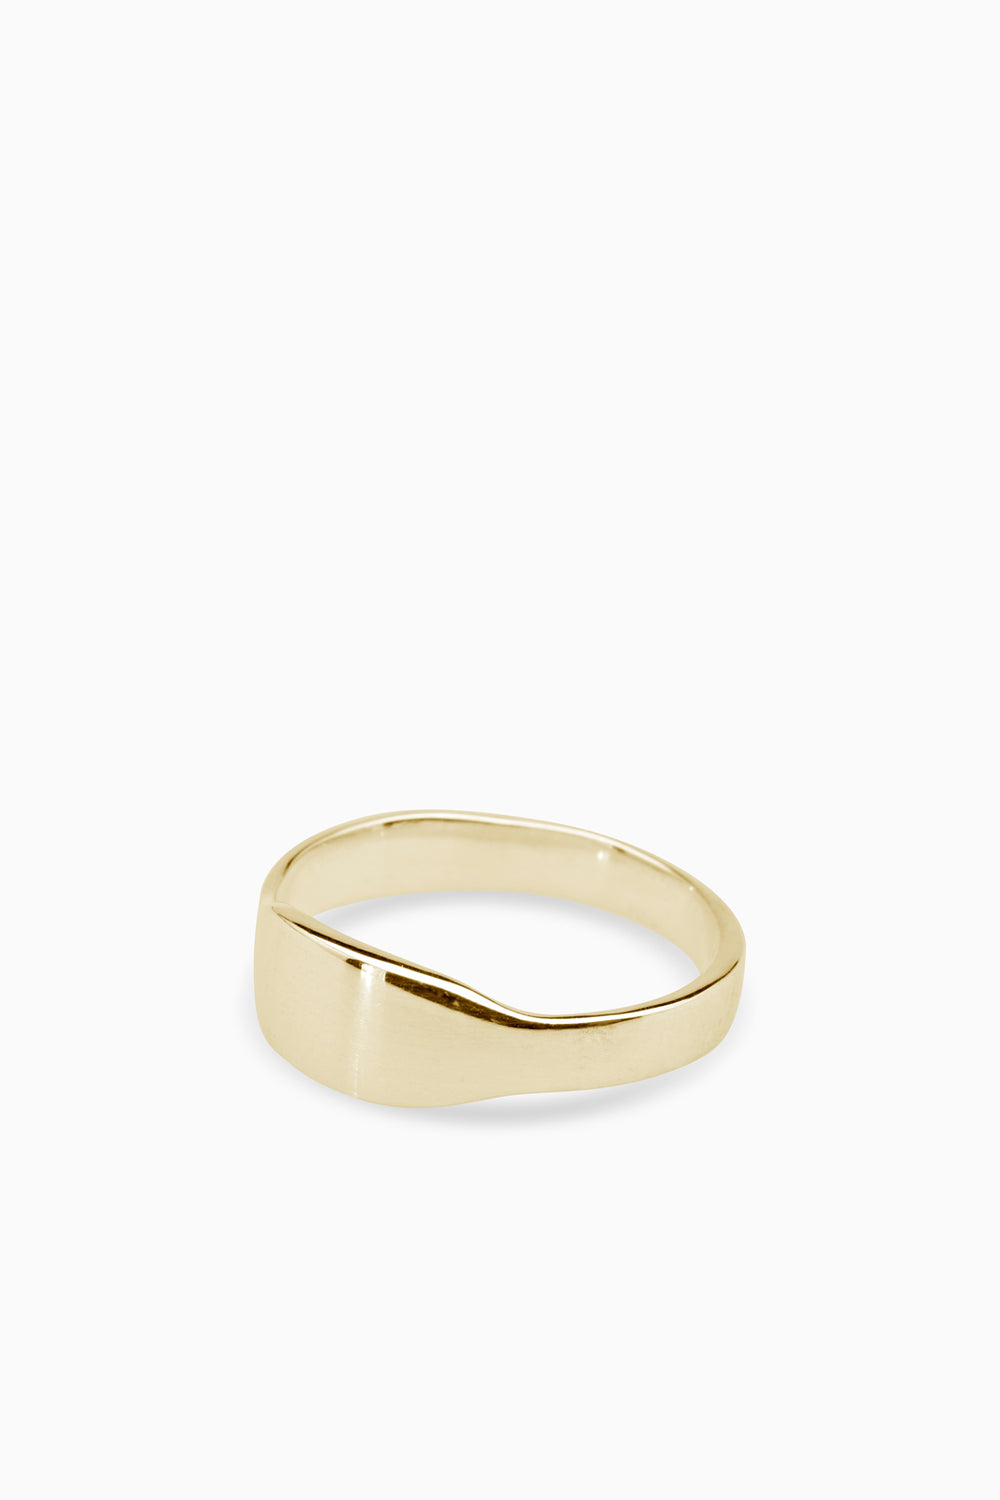 Narrow Signet Ring | Solid Gold